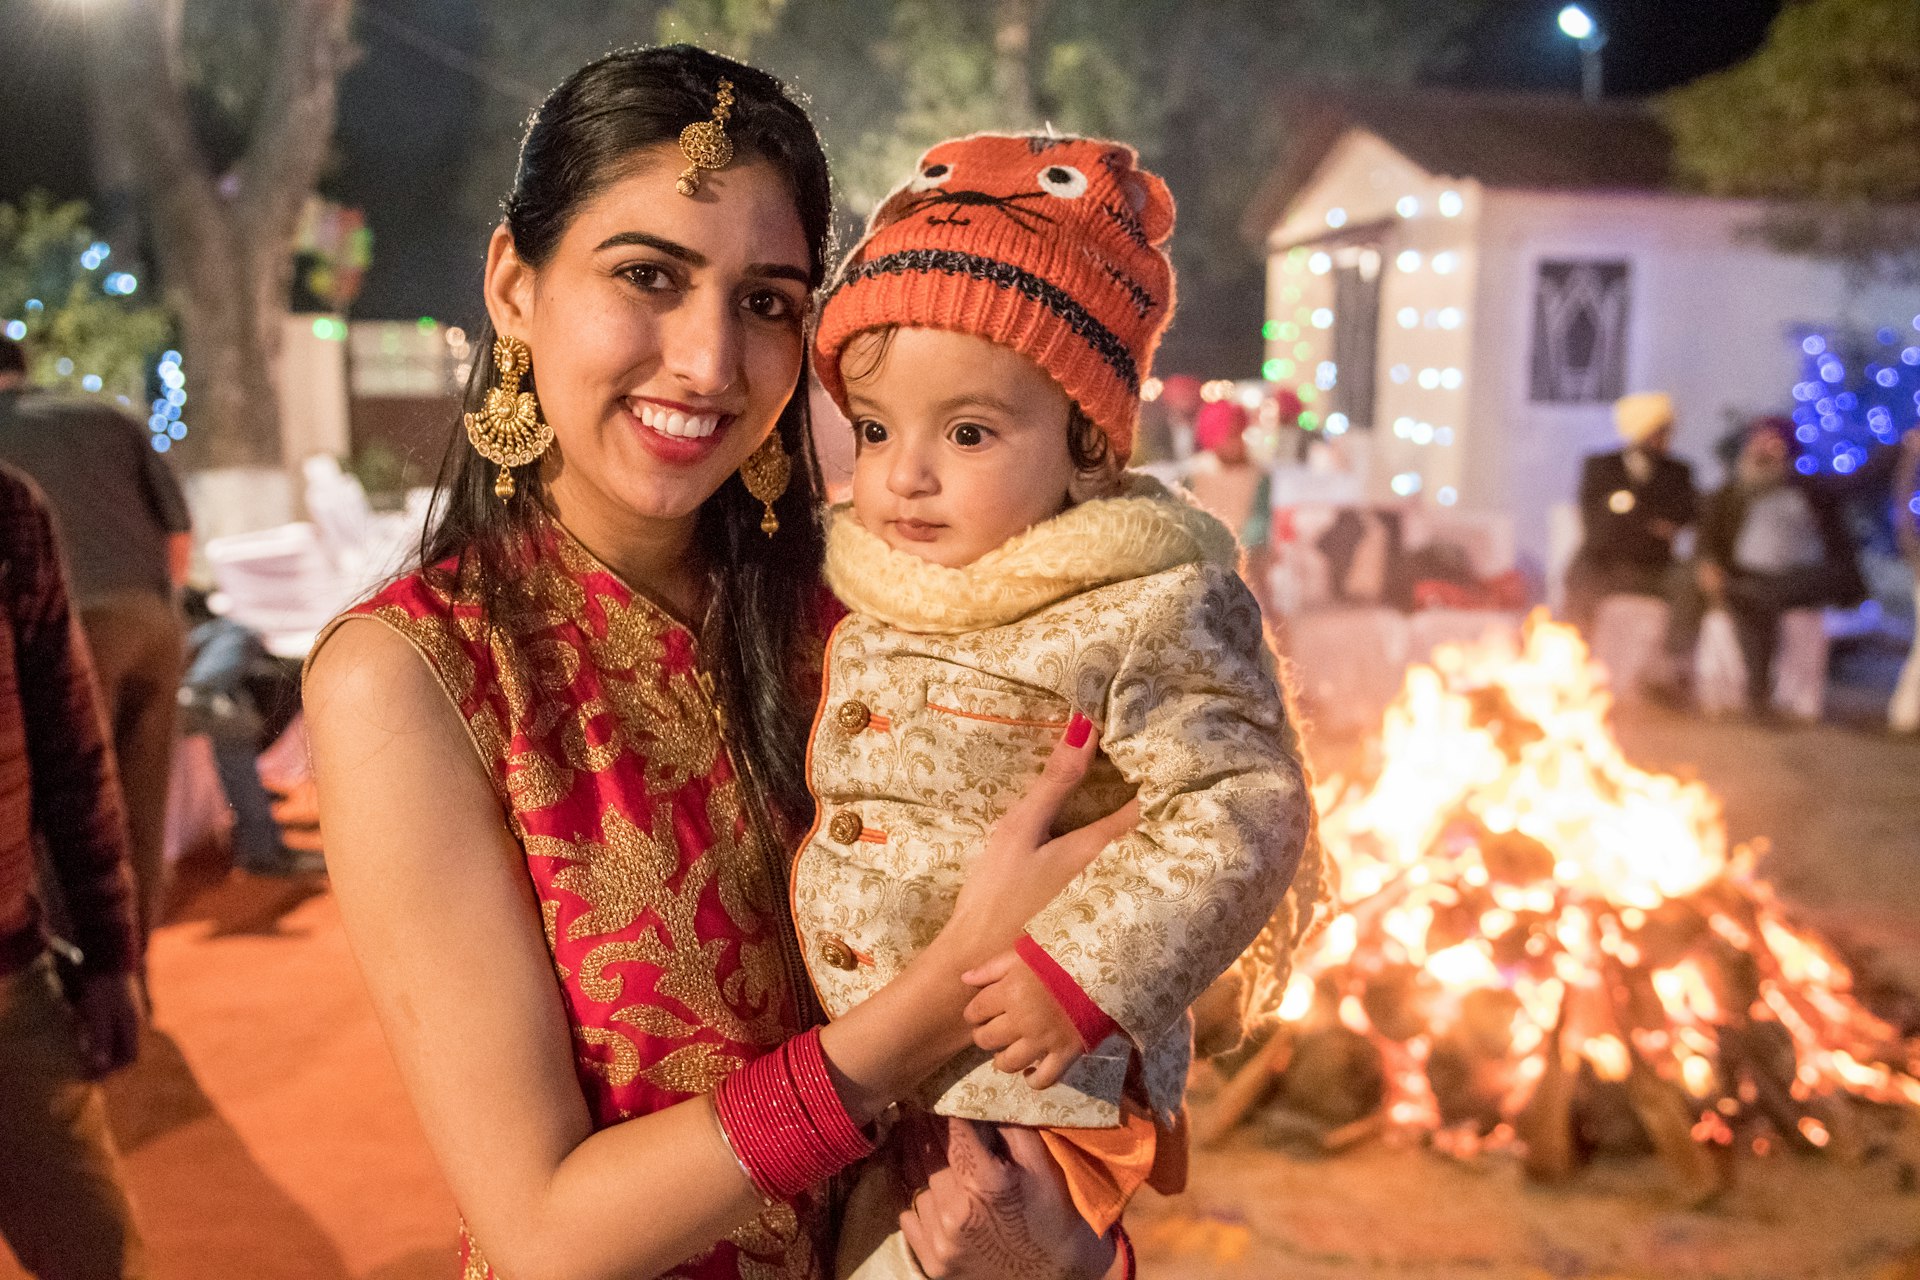 A mother and child dressed in traditional Indian dress during the Lohri festival, India